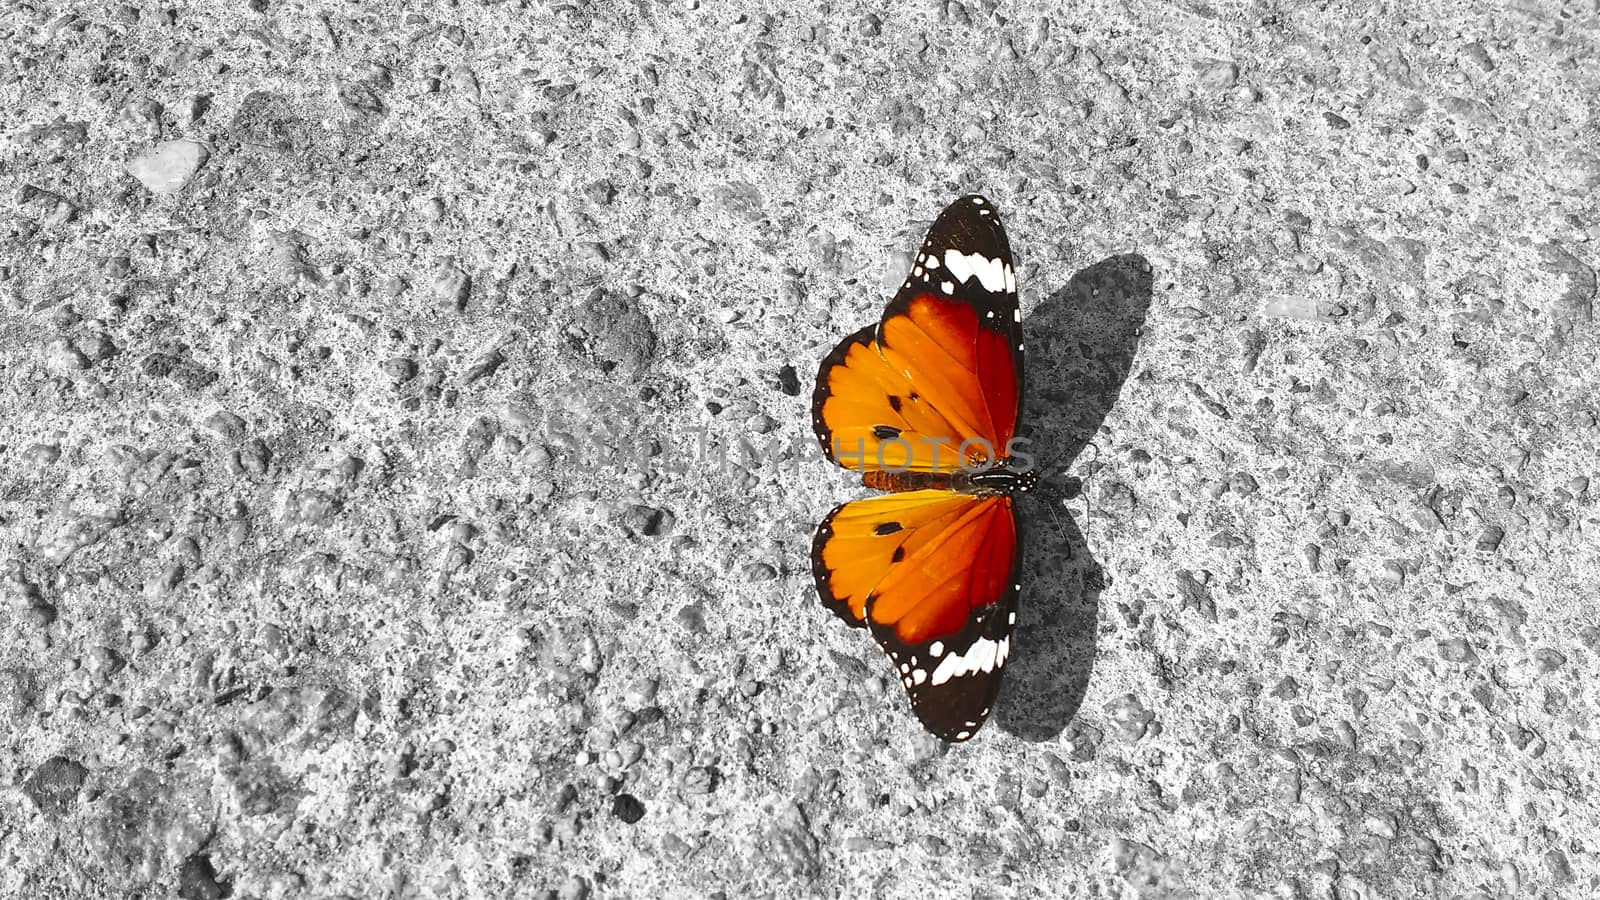 A butterfly Danaus Chrysippus, Plain Tiger, resting on a concret by robbyfontanesi